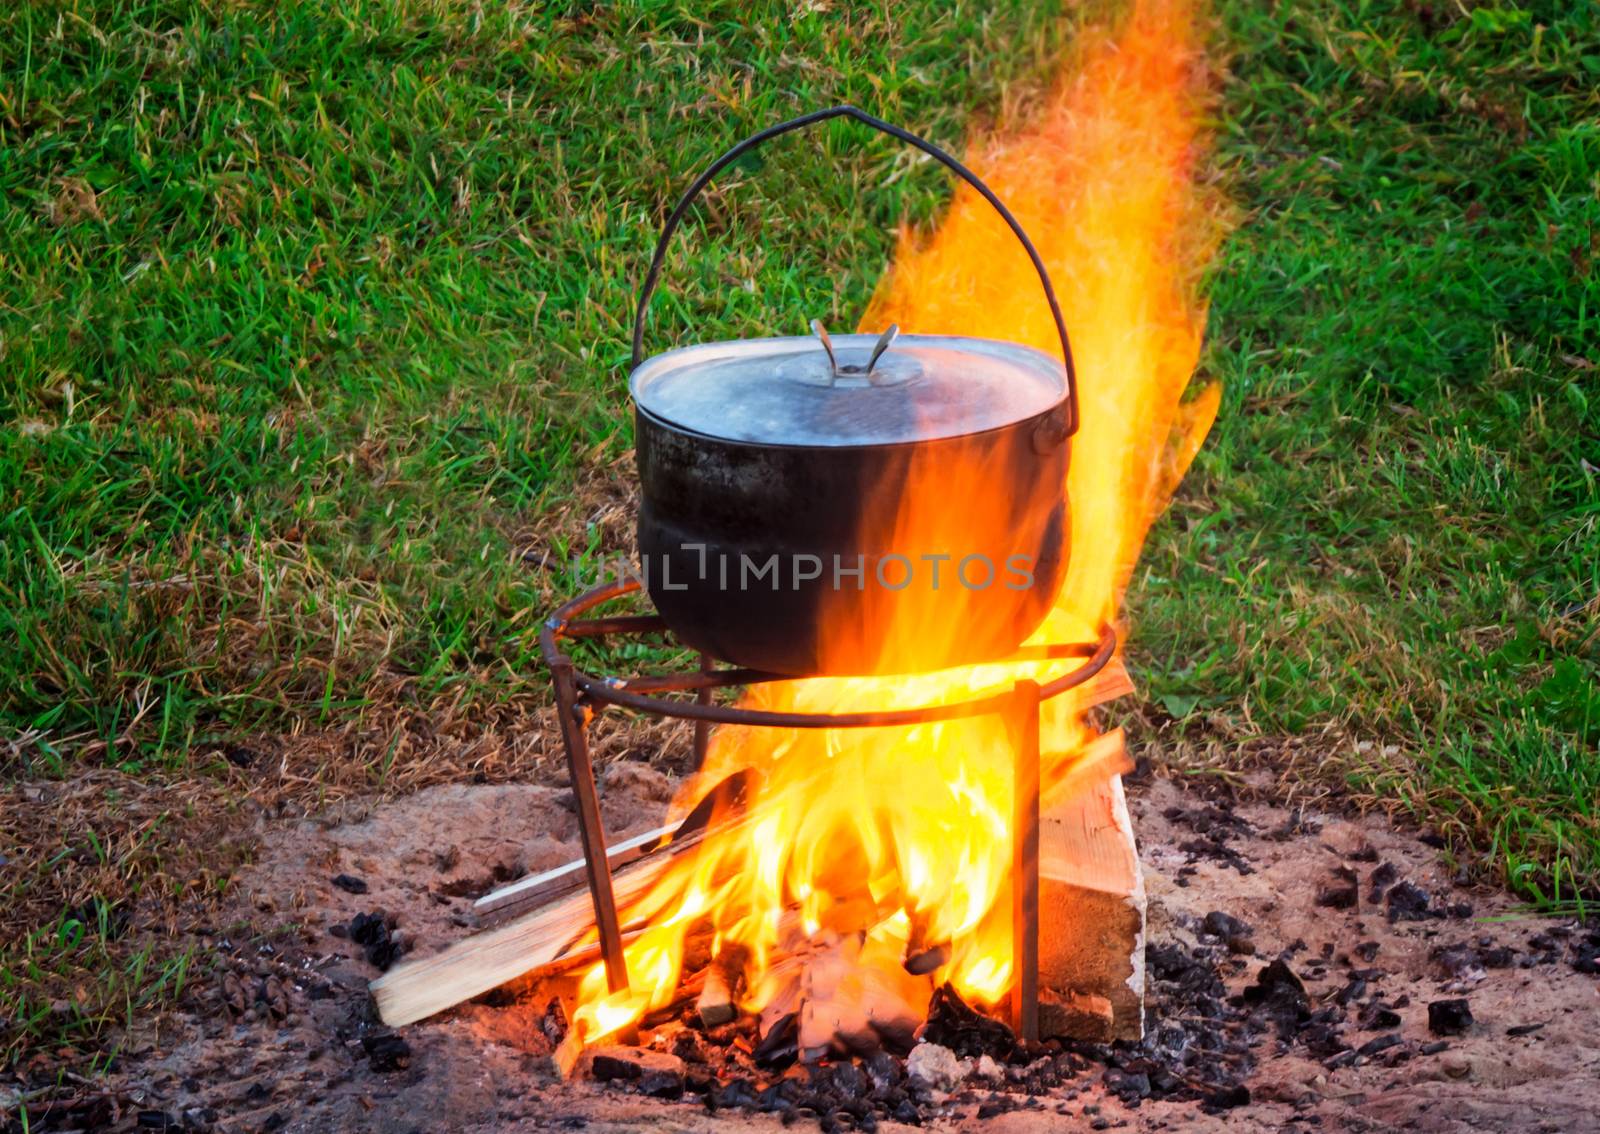 On a green meadow on a burning fire in a pan the food is cooked